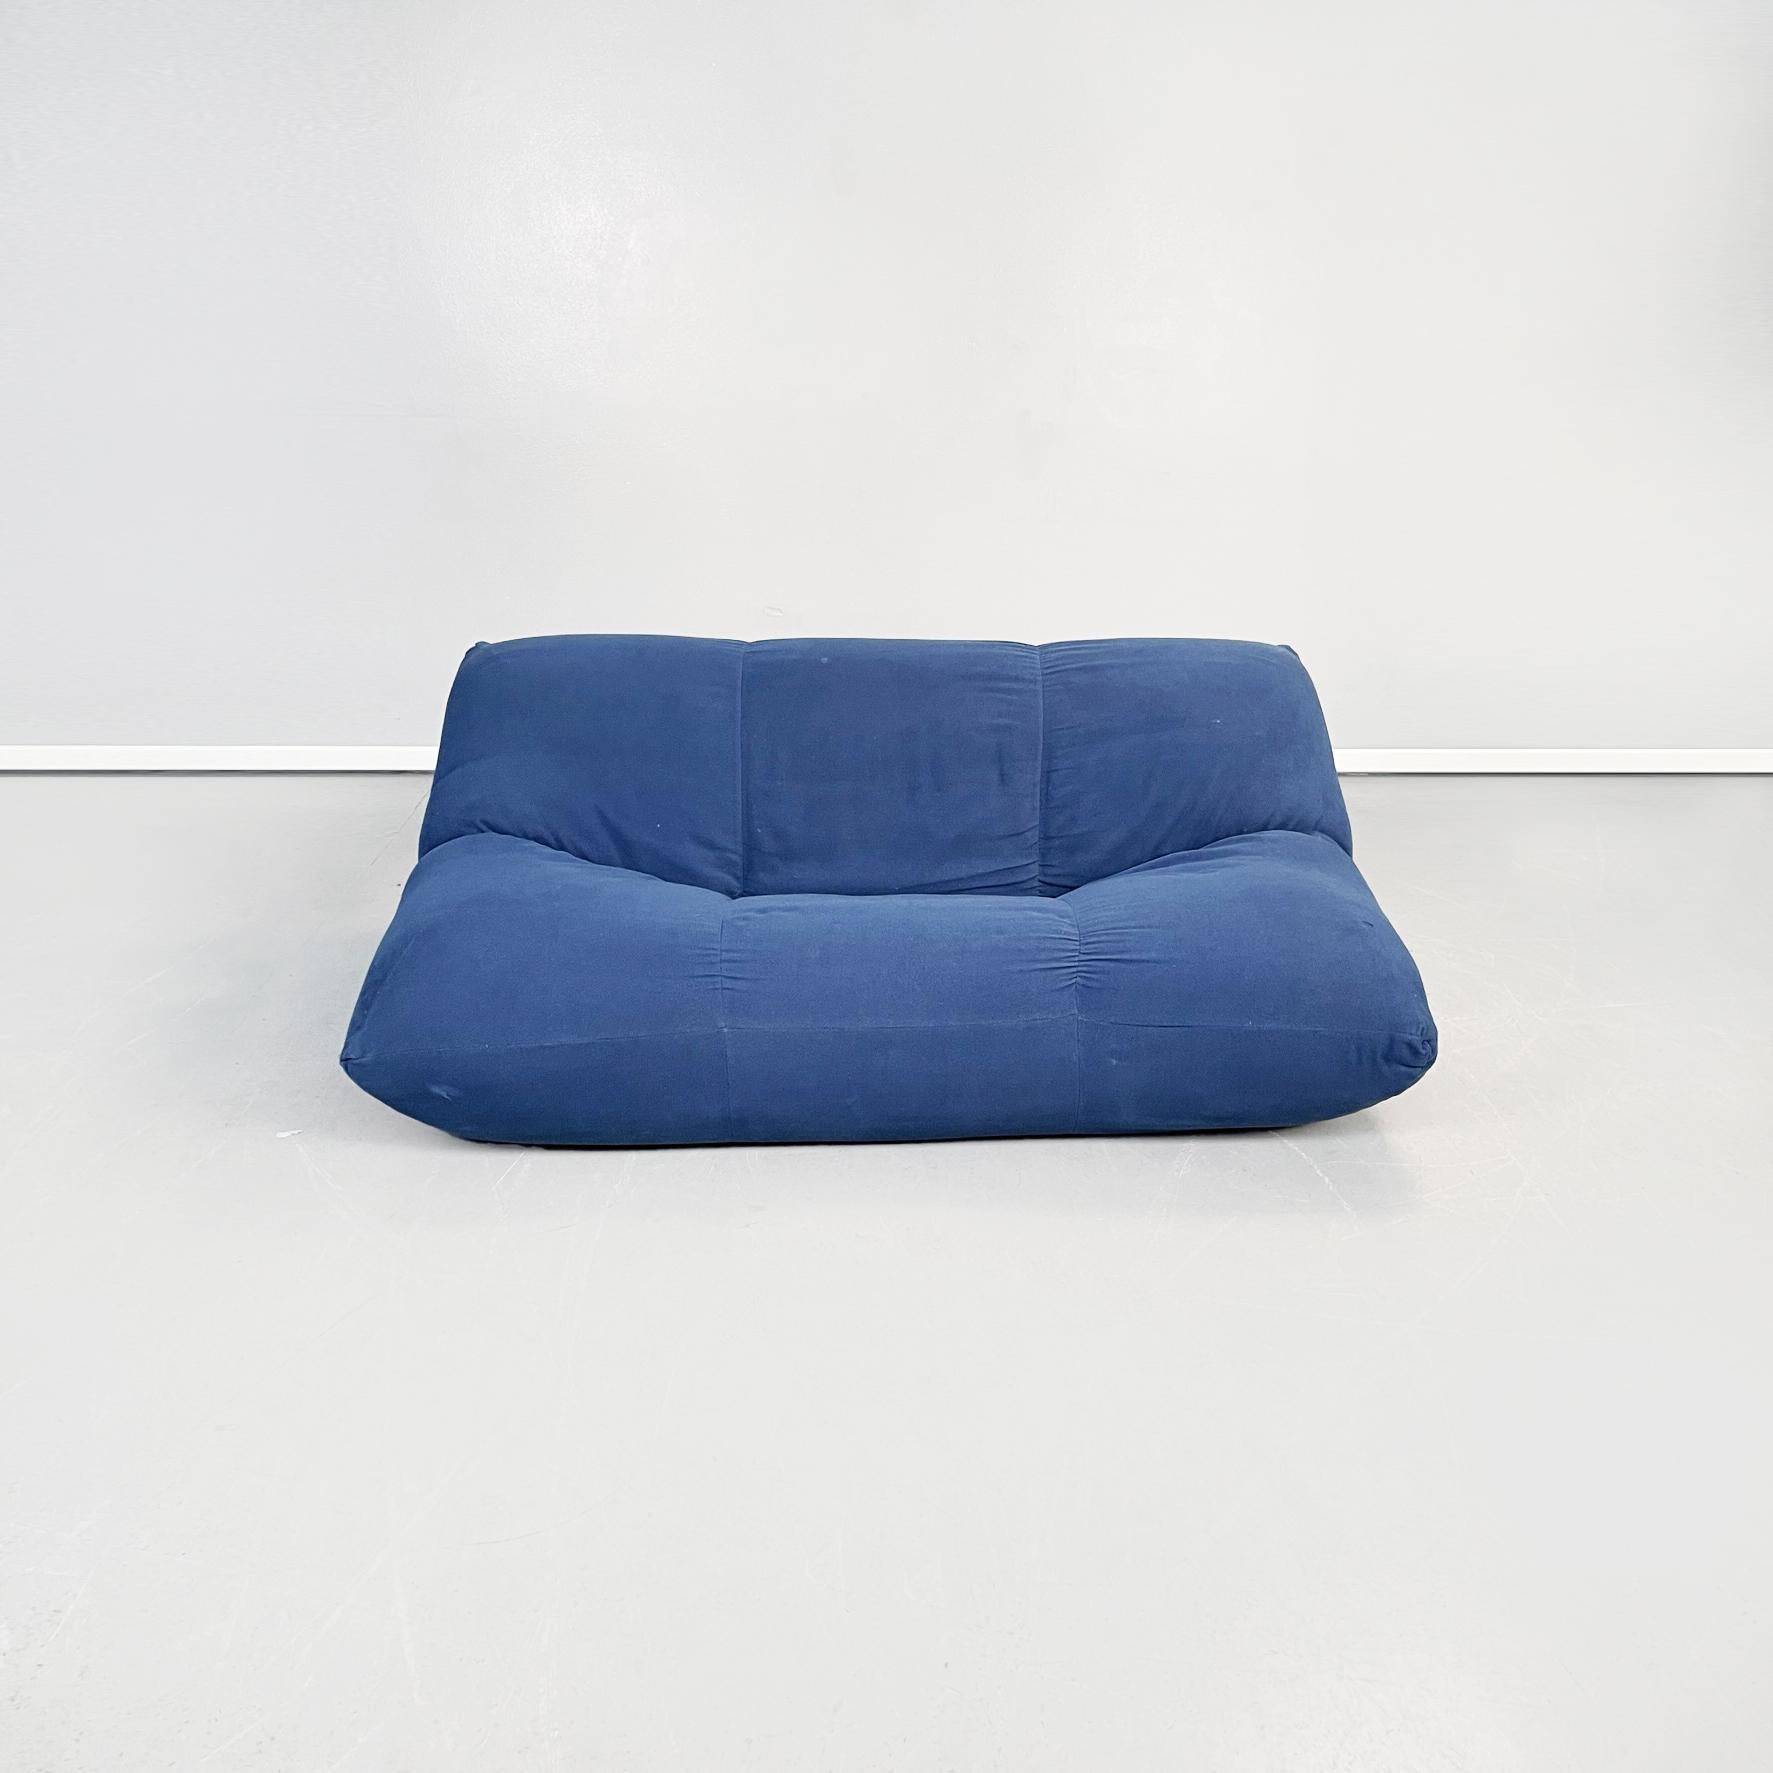 Italian modern living room set in blue fabric by Guido Rosati for Giovannetti, 1970s
Living room set mod. Papillon composed of a two-seater sofa and a pair of armchairs in blue fabric. The sofa has an extremely comfortable seat entirely padded with